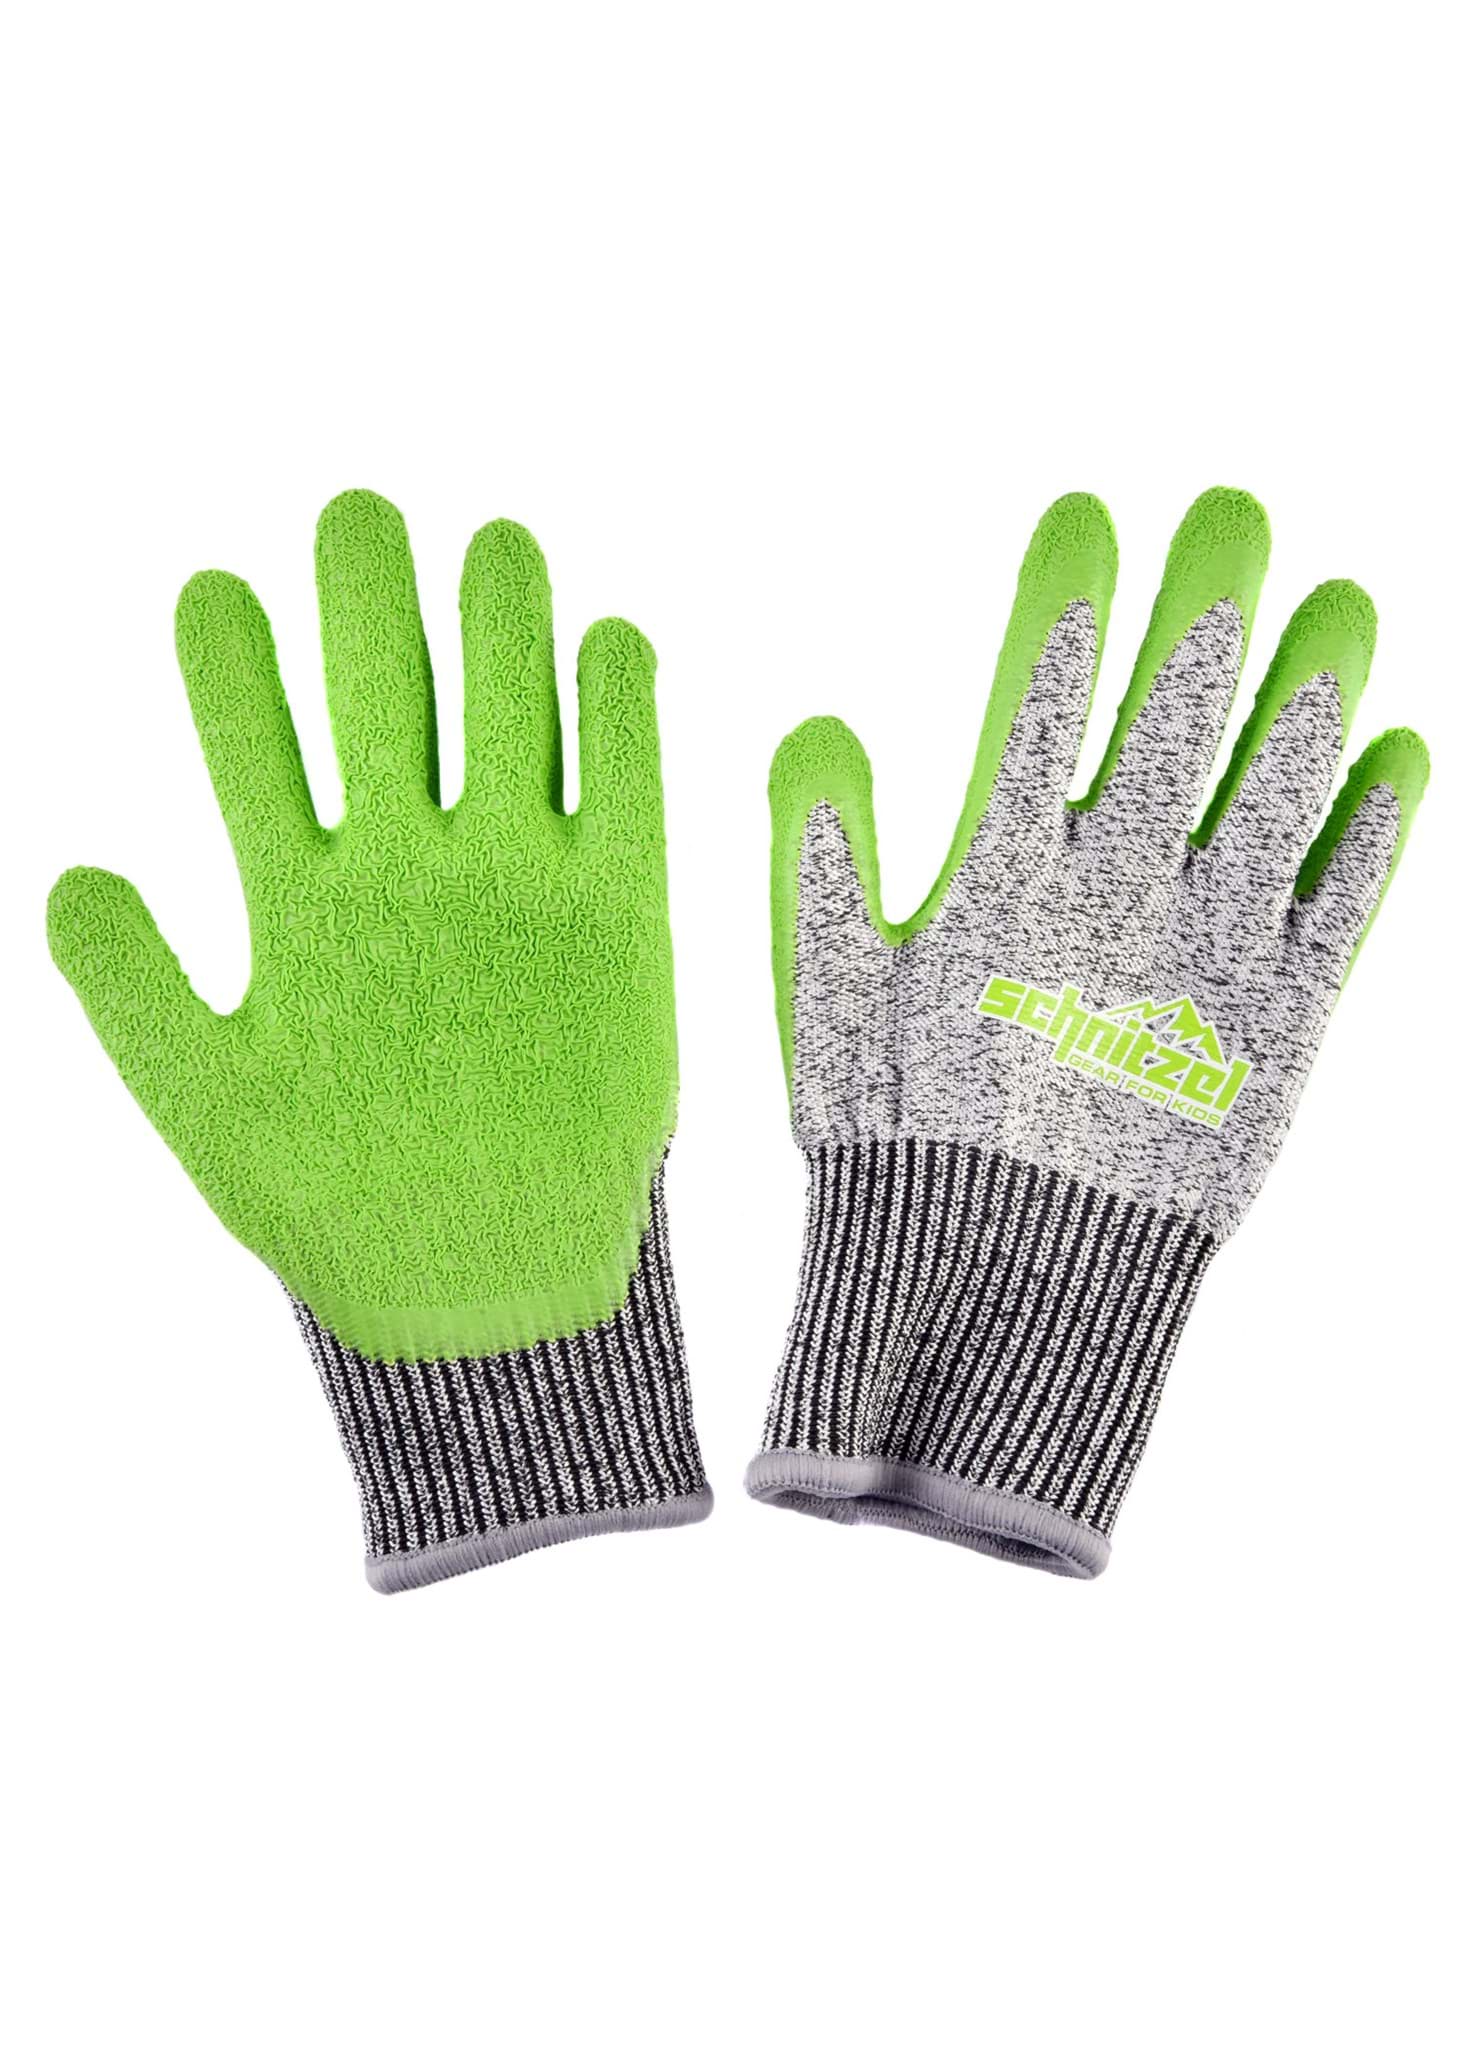 Picture of Schnitzel - Protekto Cut Protection Gloves for Kids Size 6